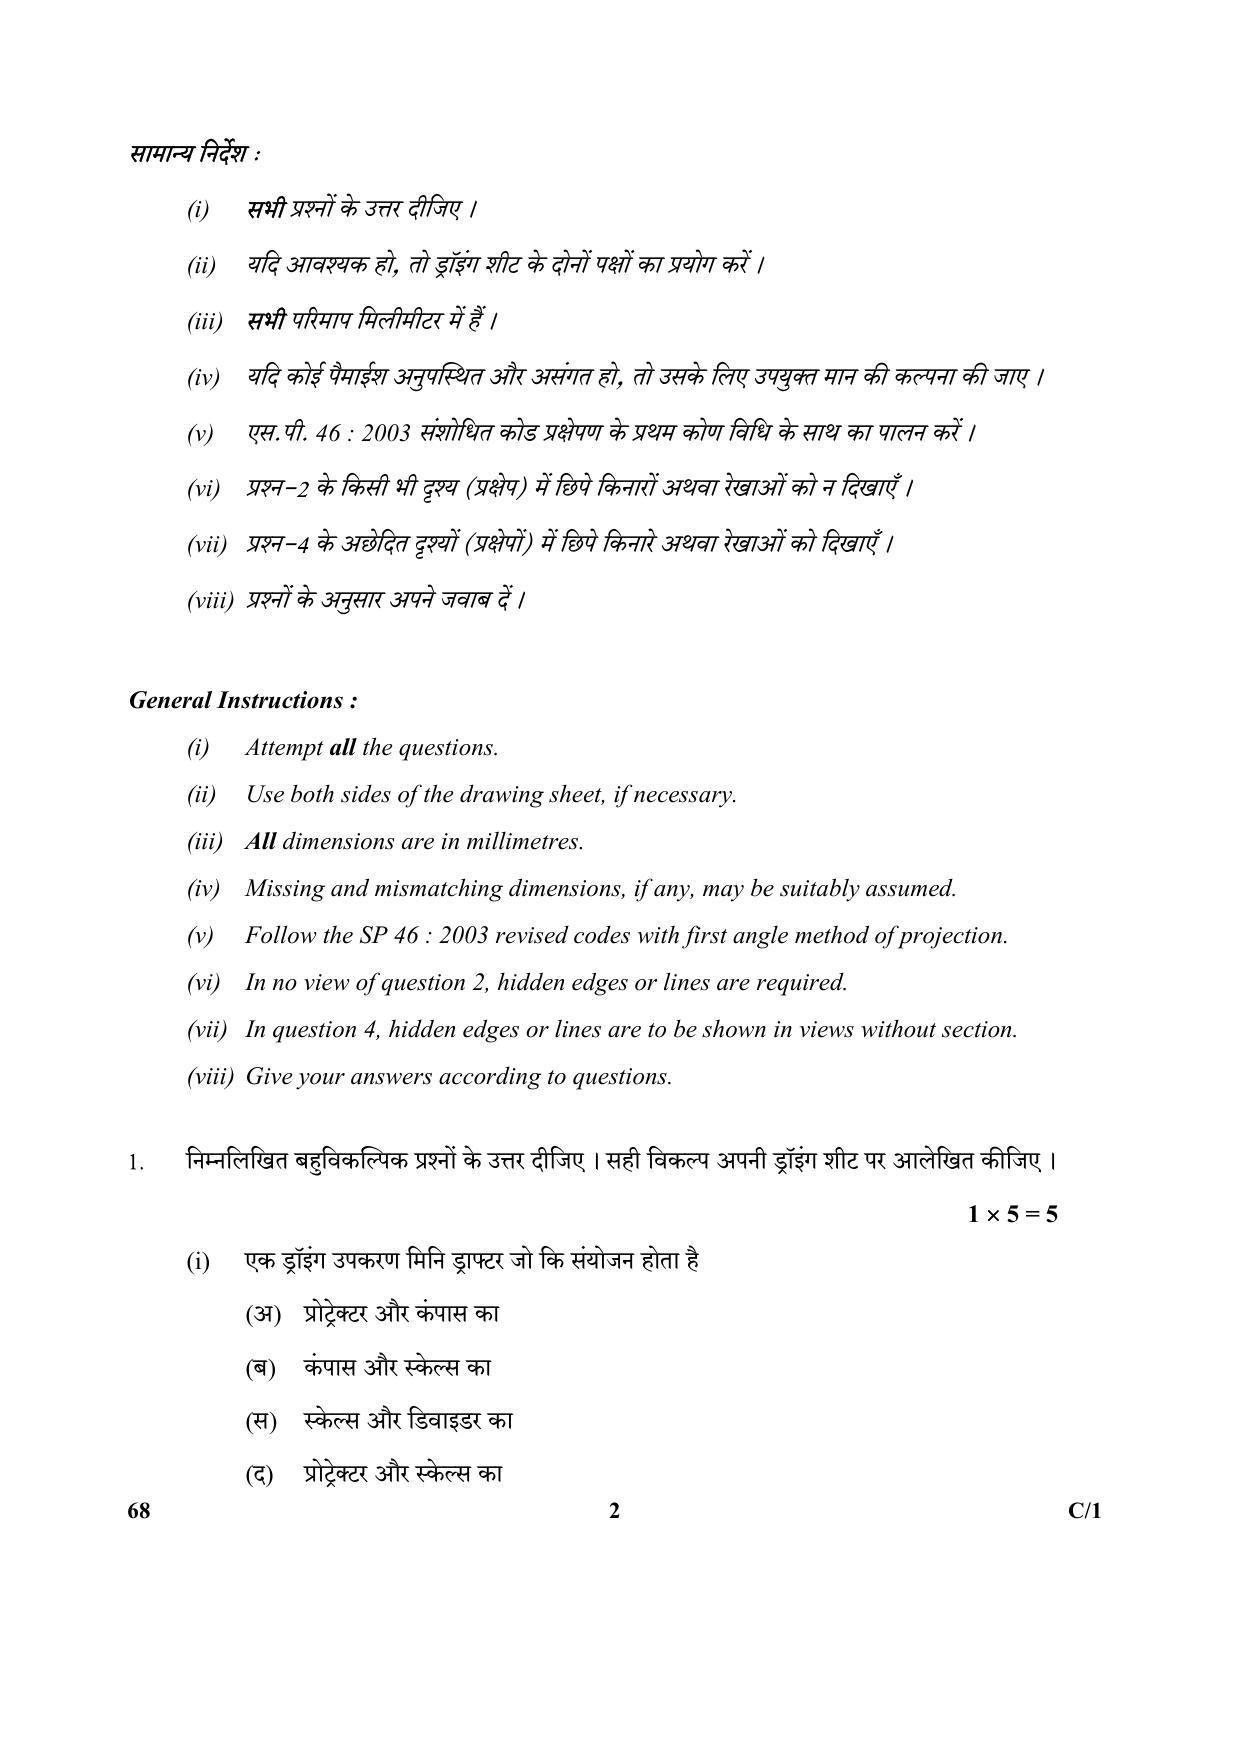 CBSE Class 12 68 (Engineering Graphics) 2018 Compartment Question Paper - Page 2